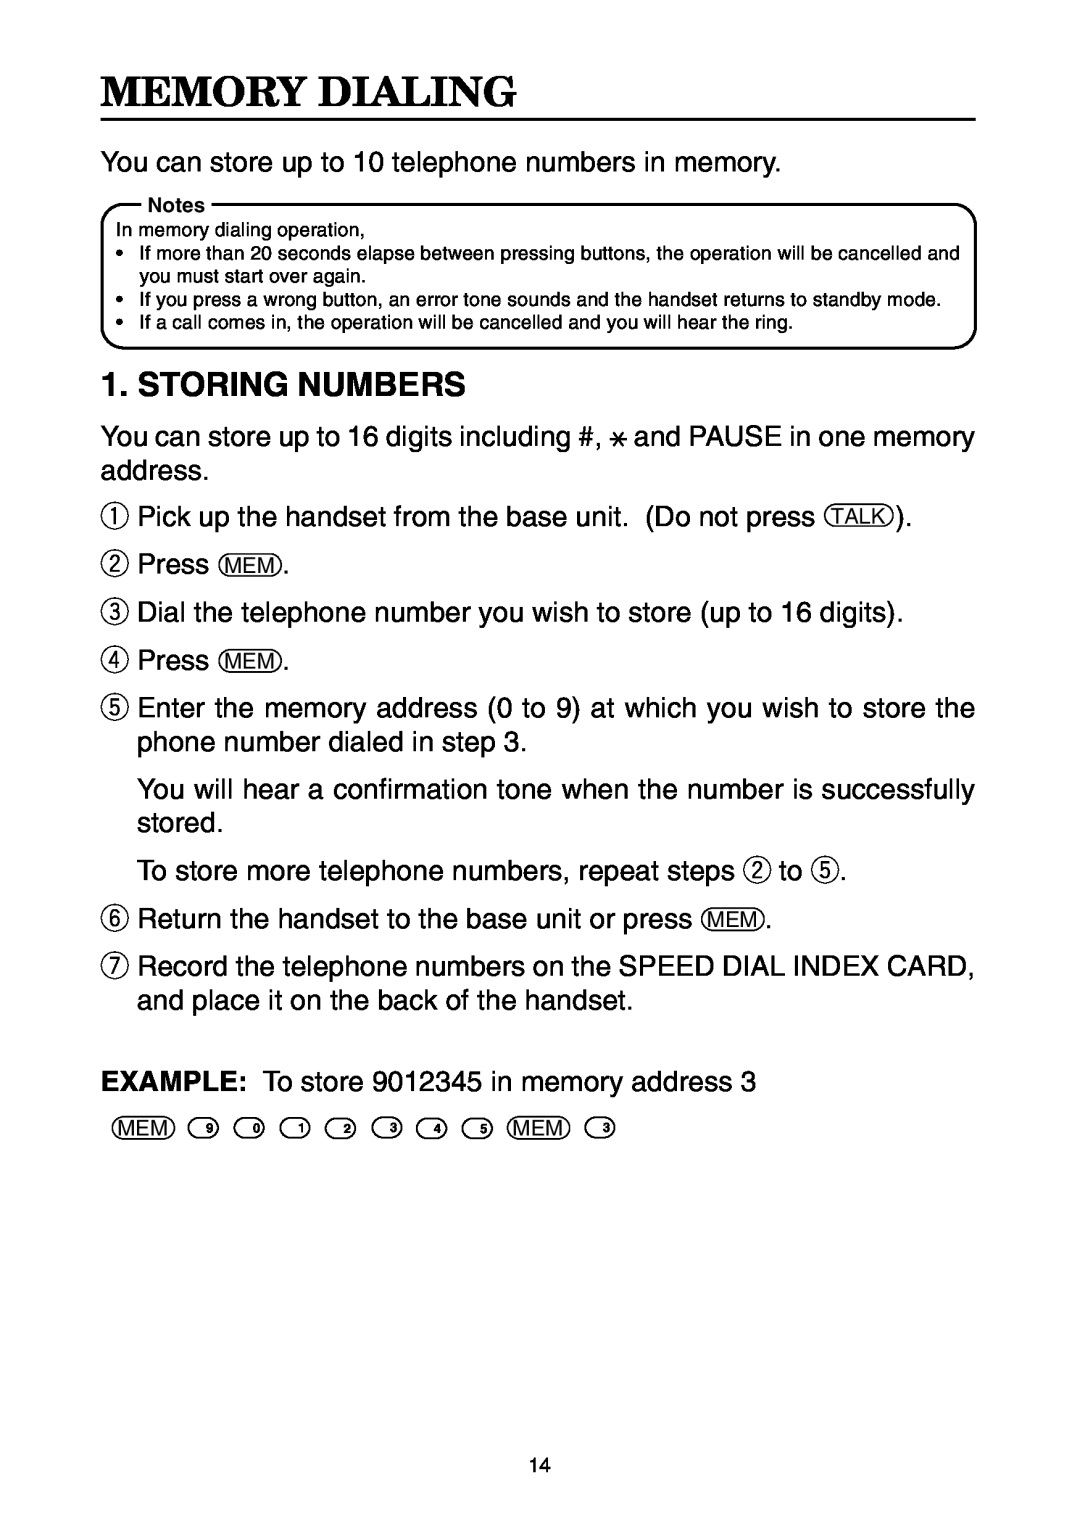 Toshiba FT-8001 AW manual Memory Dialing, Storing Numbers 